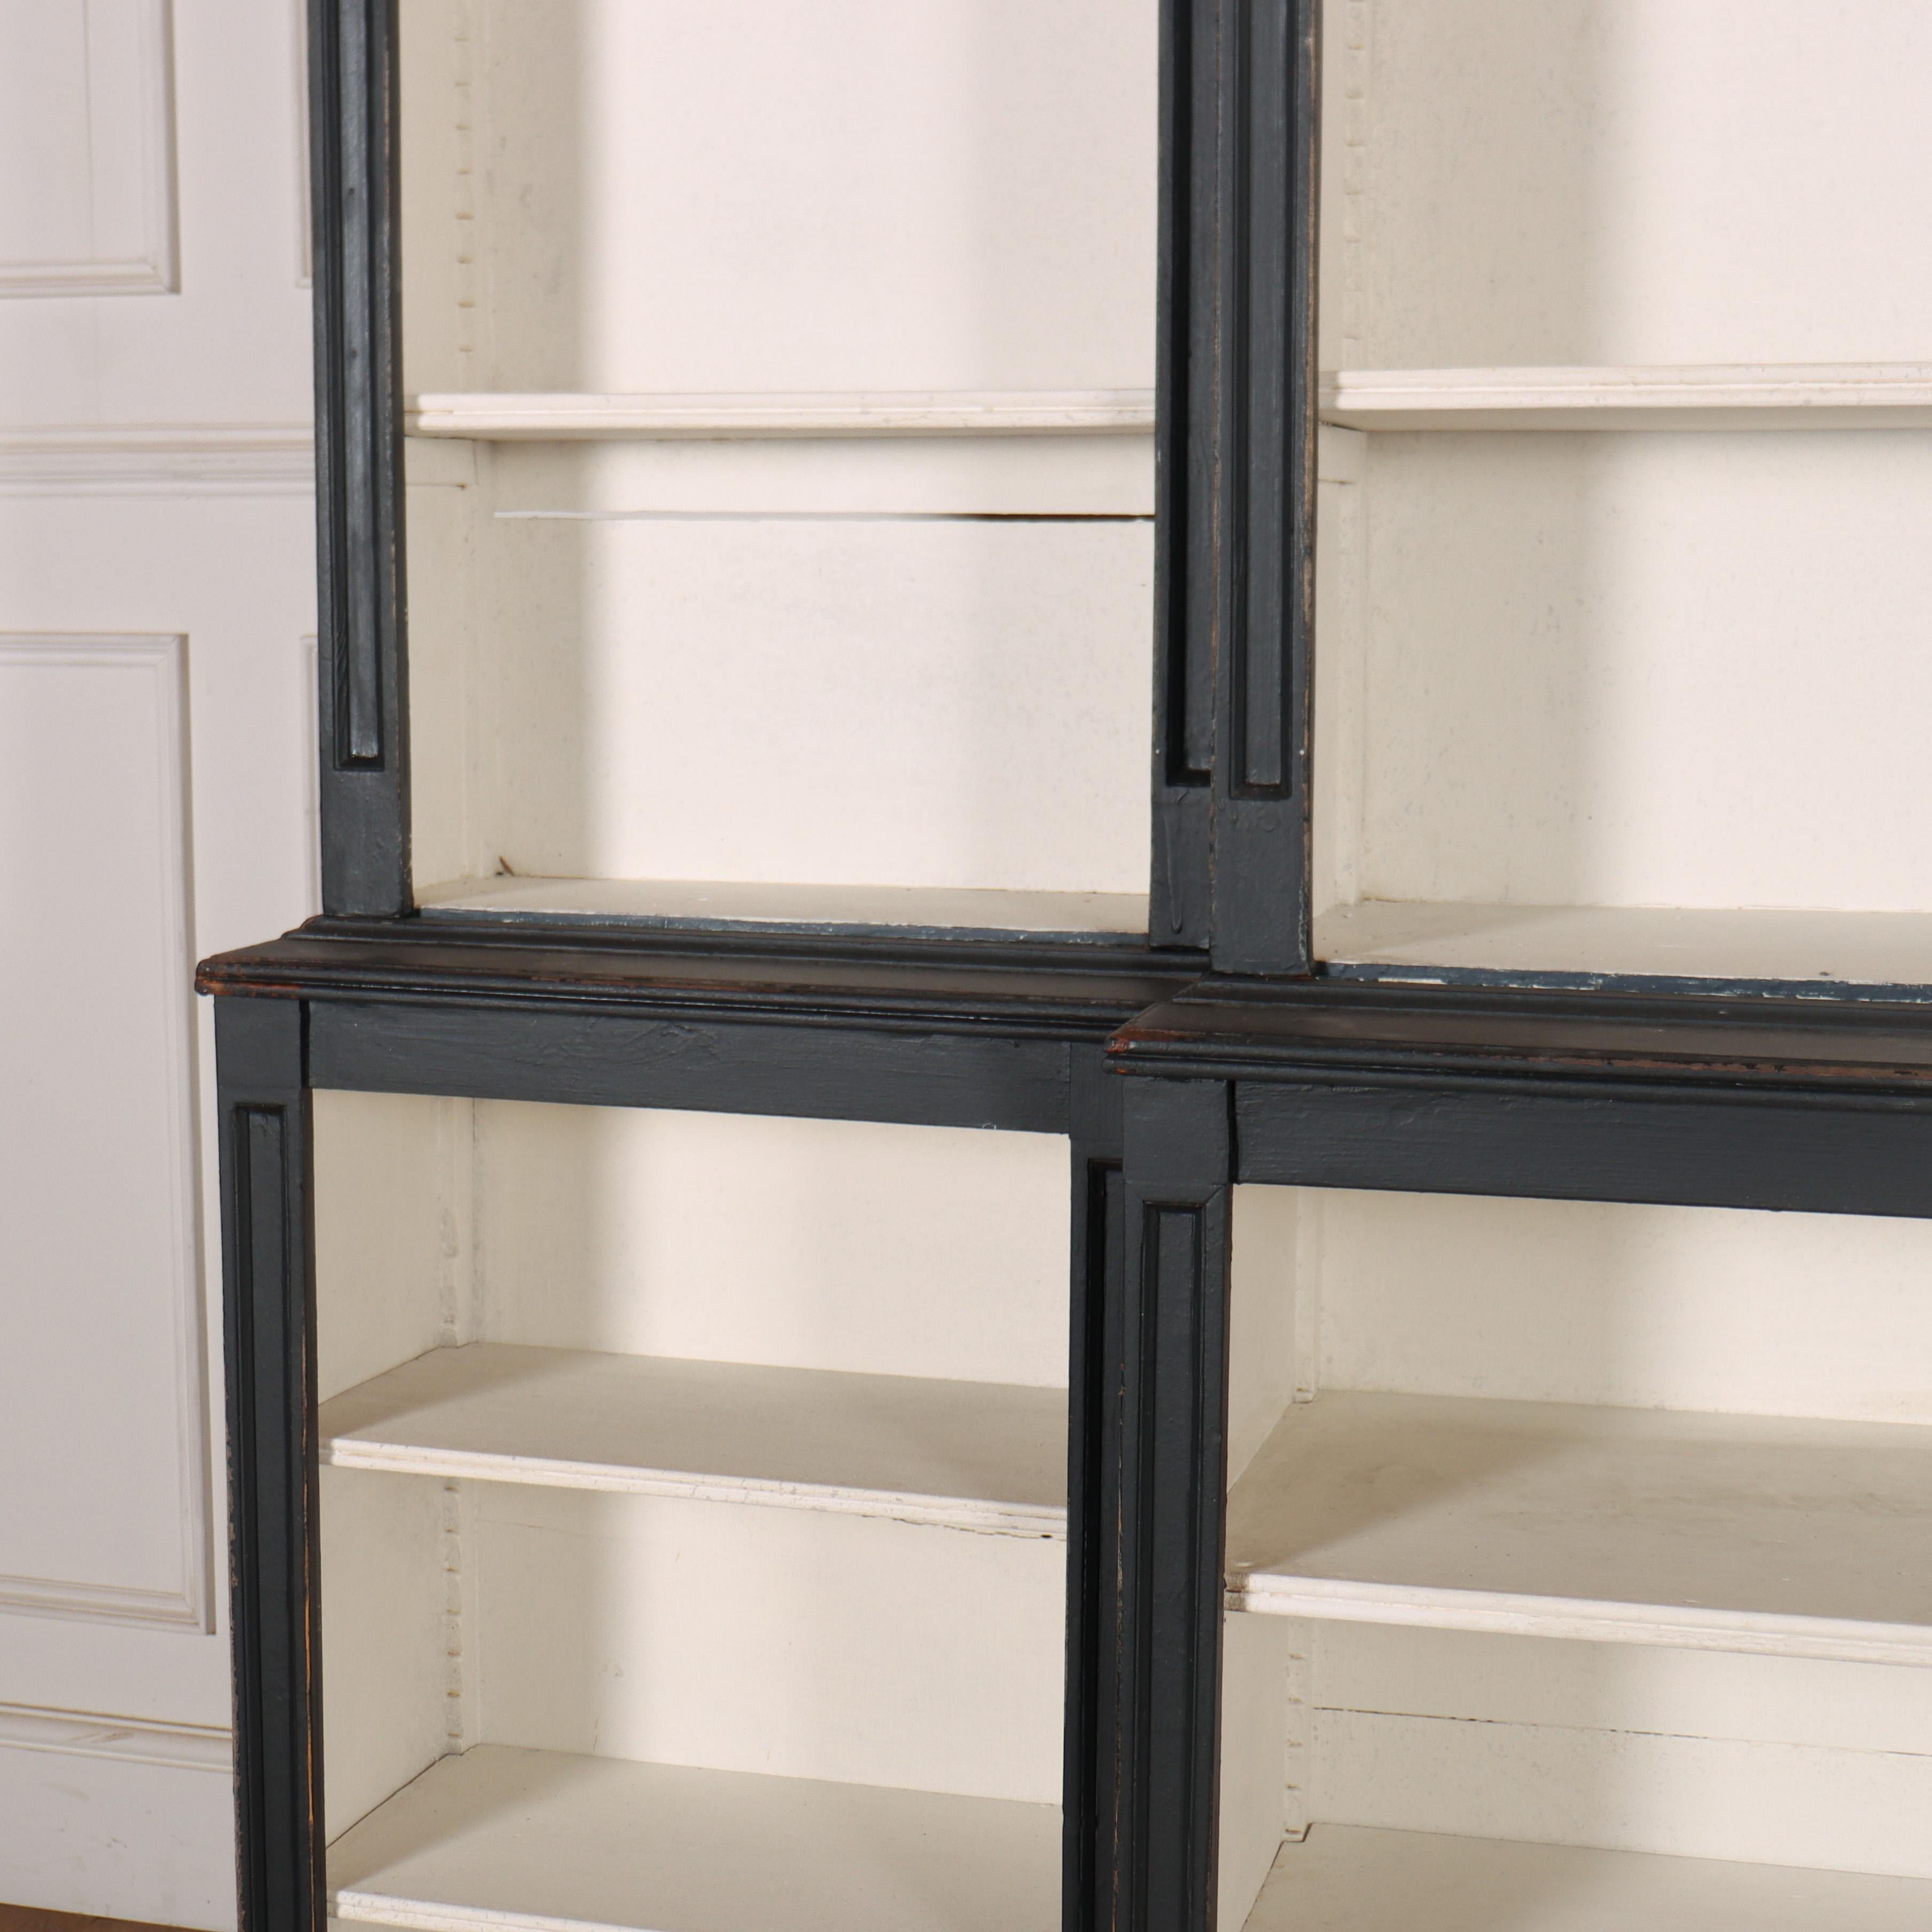 Early 19th C English painted breakfront open bookcase with adjustable shelving. 1820.

Reference: 8070

Dimensions
80.5 inches (204 cms) Wide
16.5 inches (42 cms) Deep
90.5 inches (230 cms) High